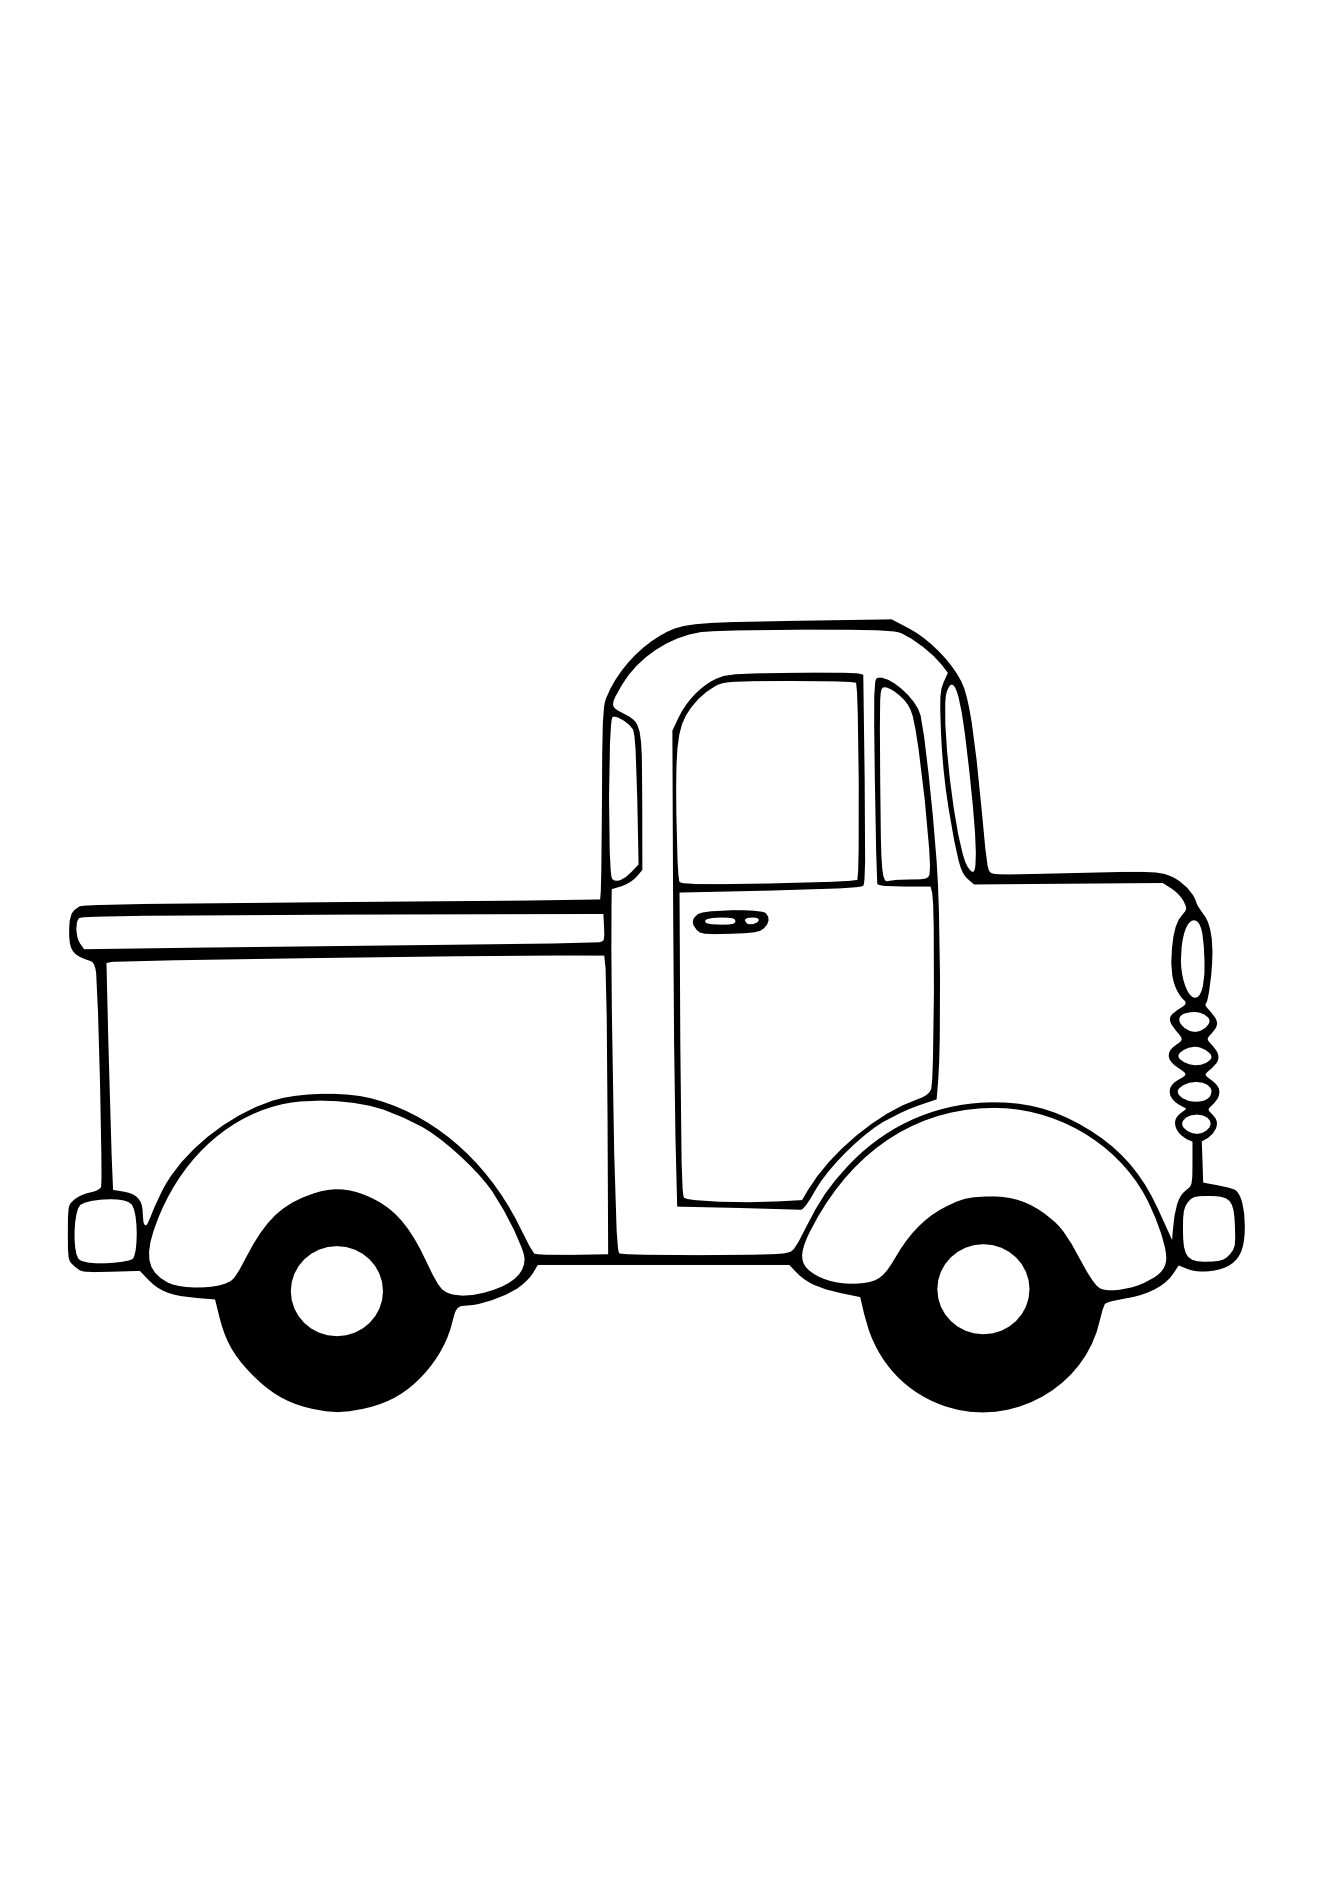 Free Truck Outline Download Free Clip Art Free Clip Art On Clipart Library